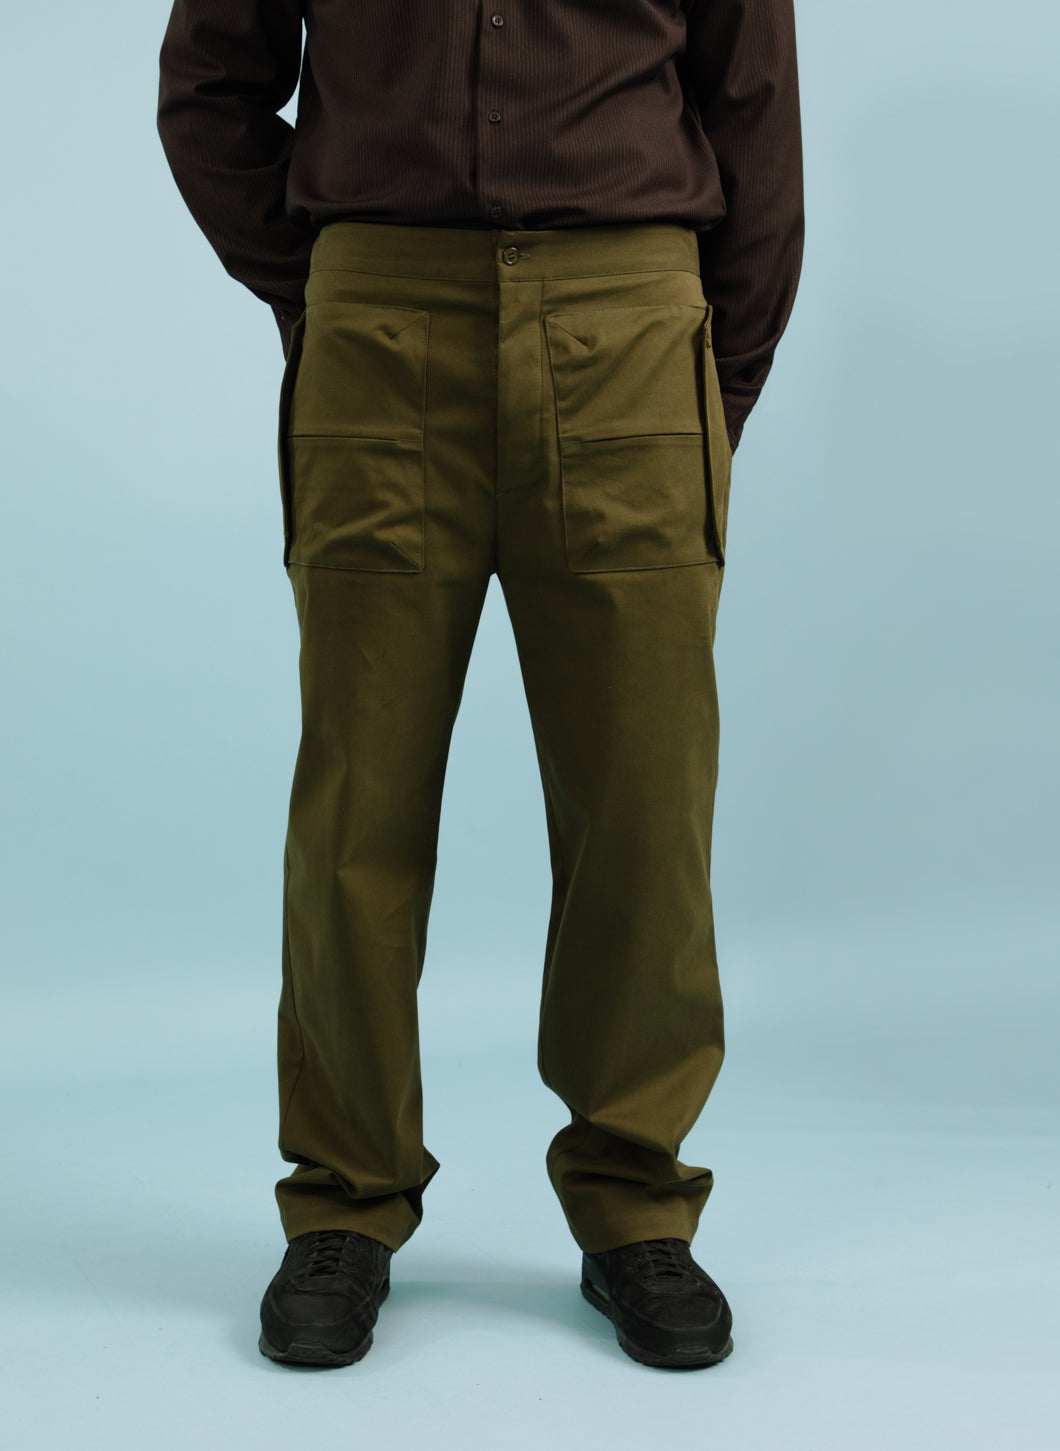 Pants with Envelope Pockets in Olive Satin Cotton